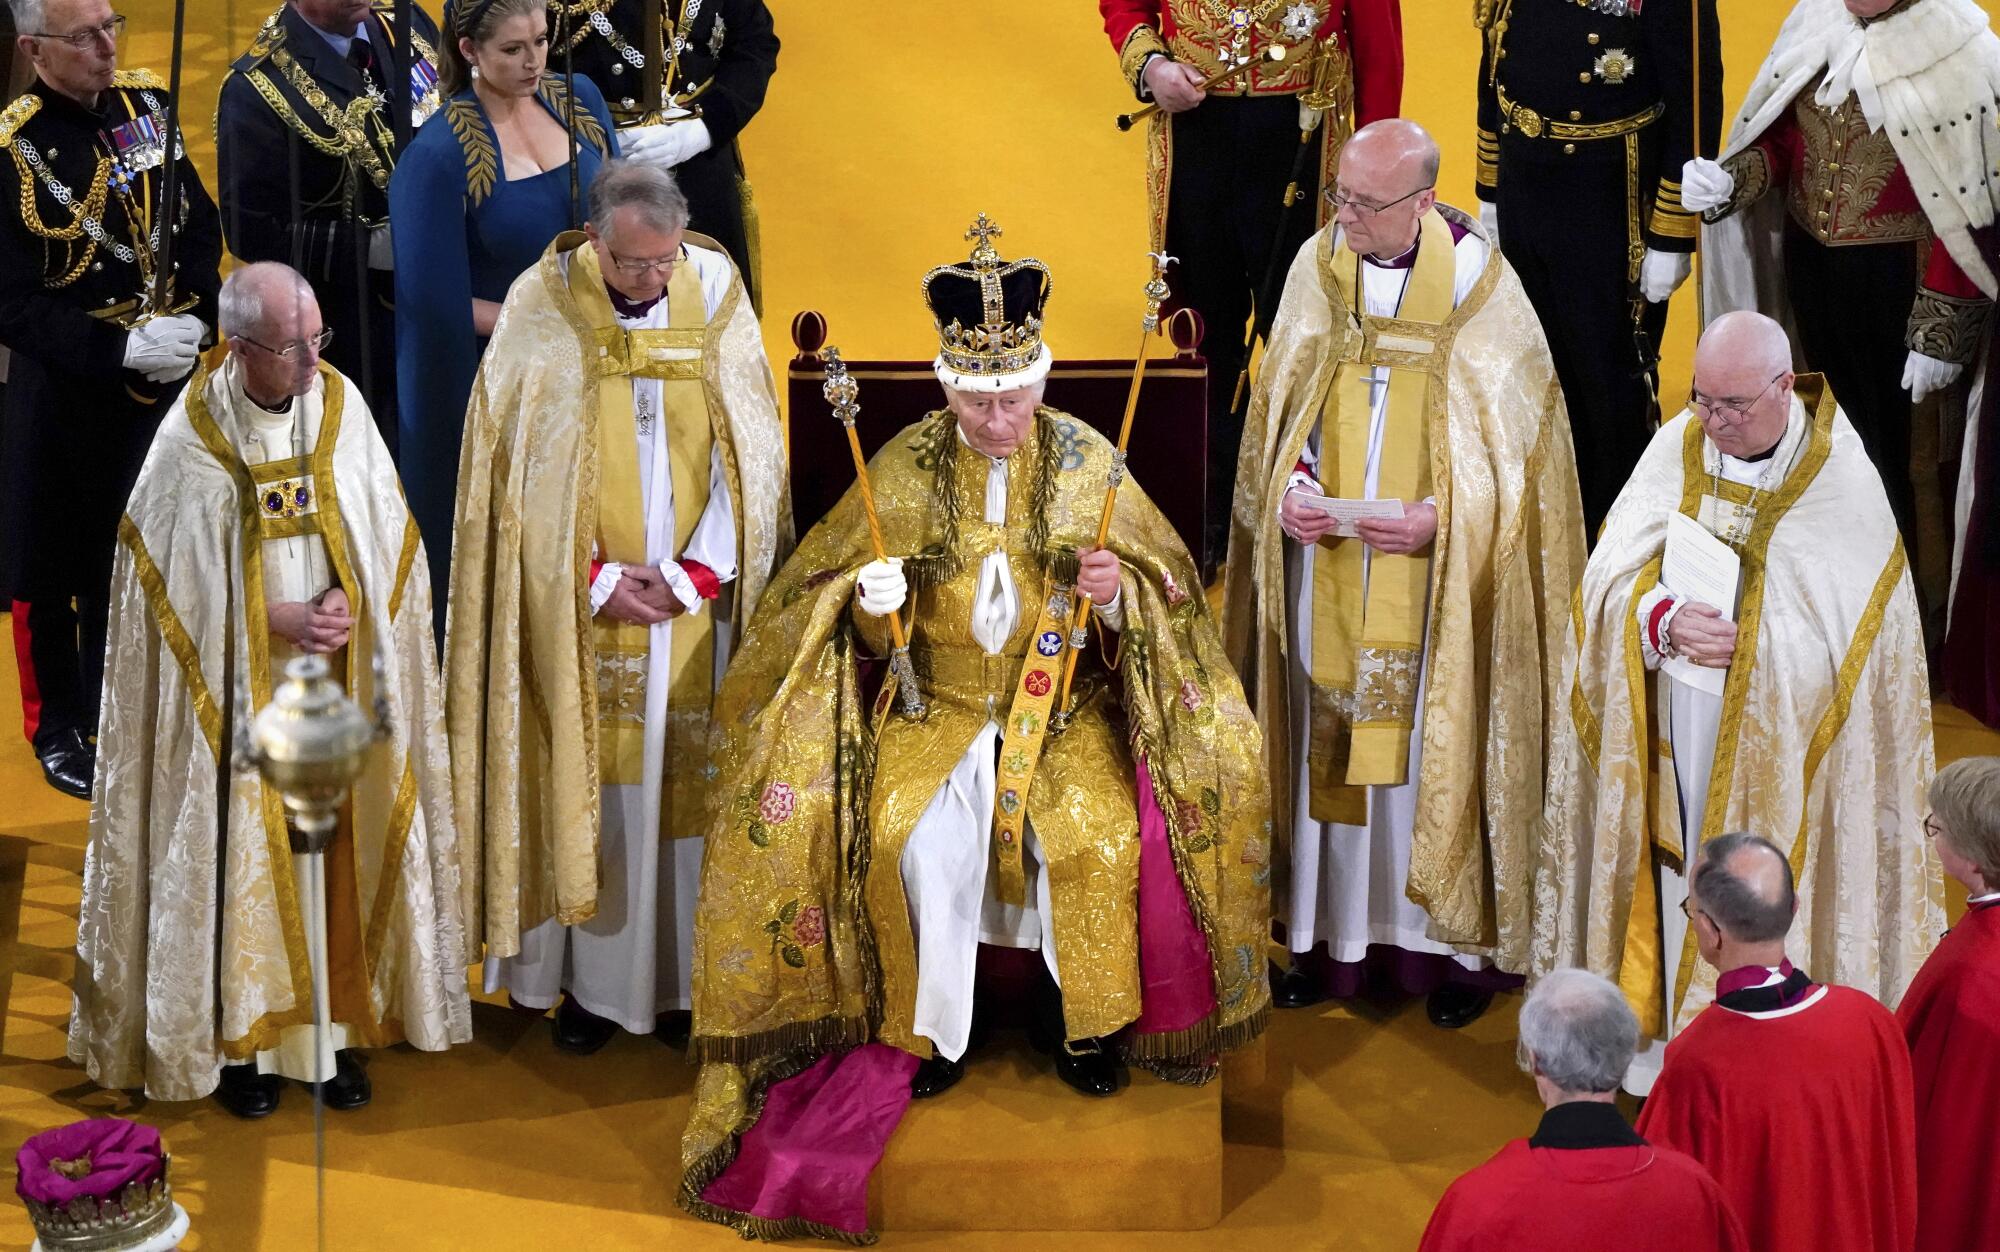 Britain's King Charles III wears St. Edward's Crown during his coronation at Westminster Abbey.